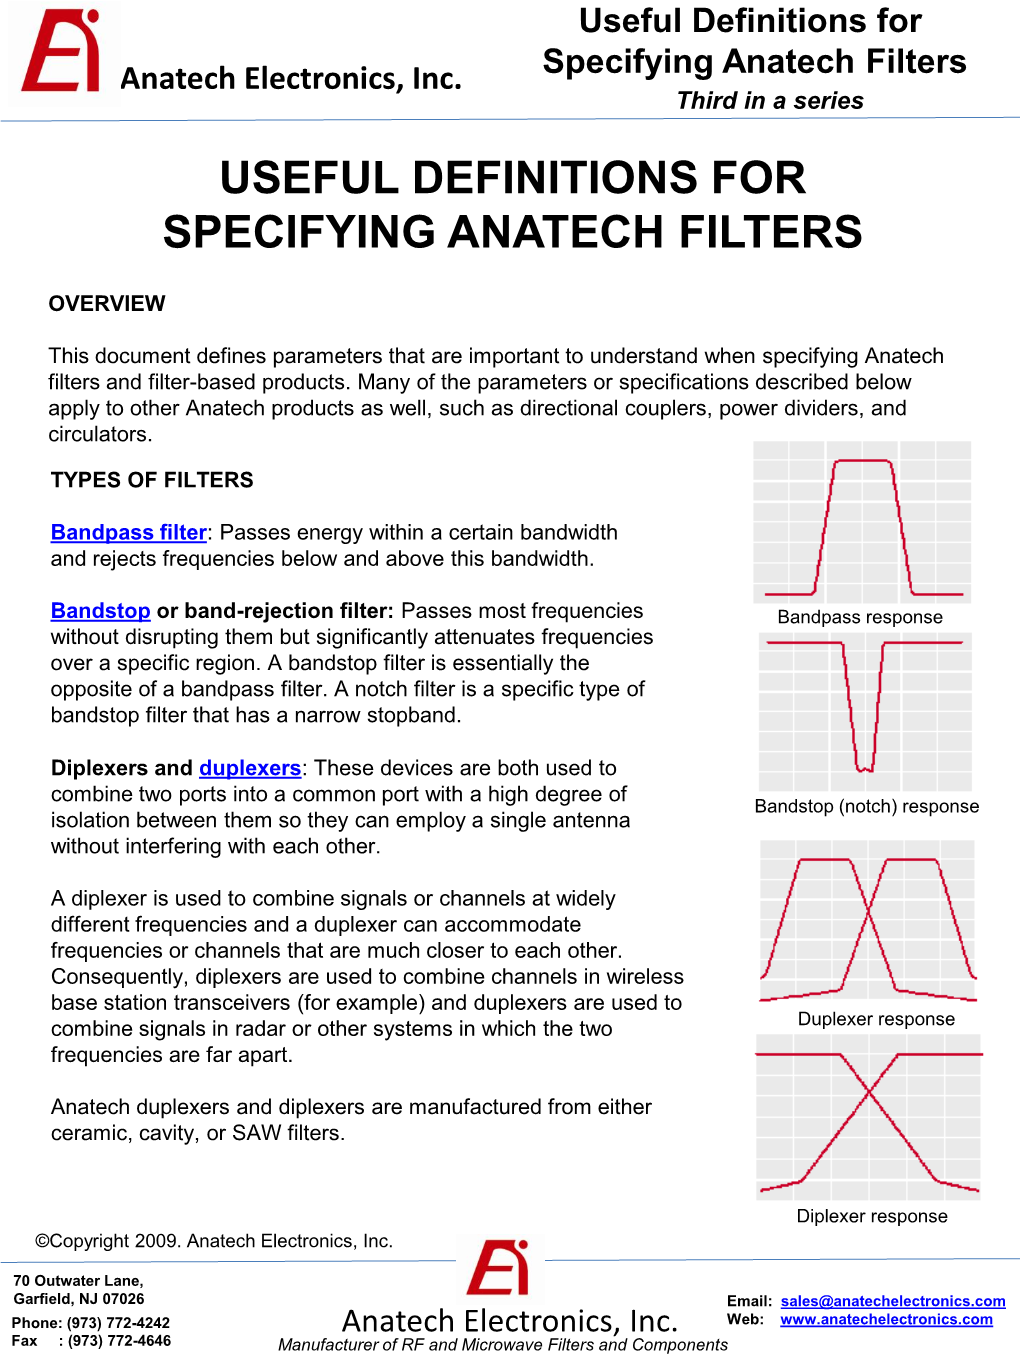 Useful Definitions for Specifying Anatech Filters Anatech Electronics, Inc